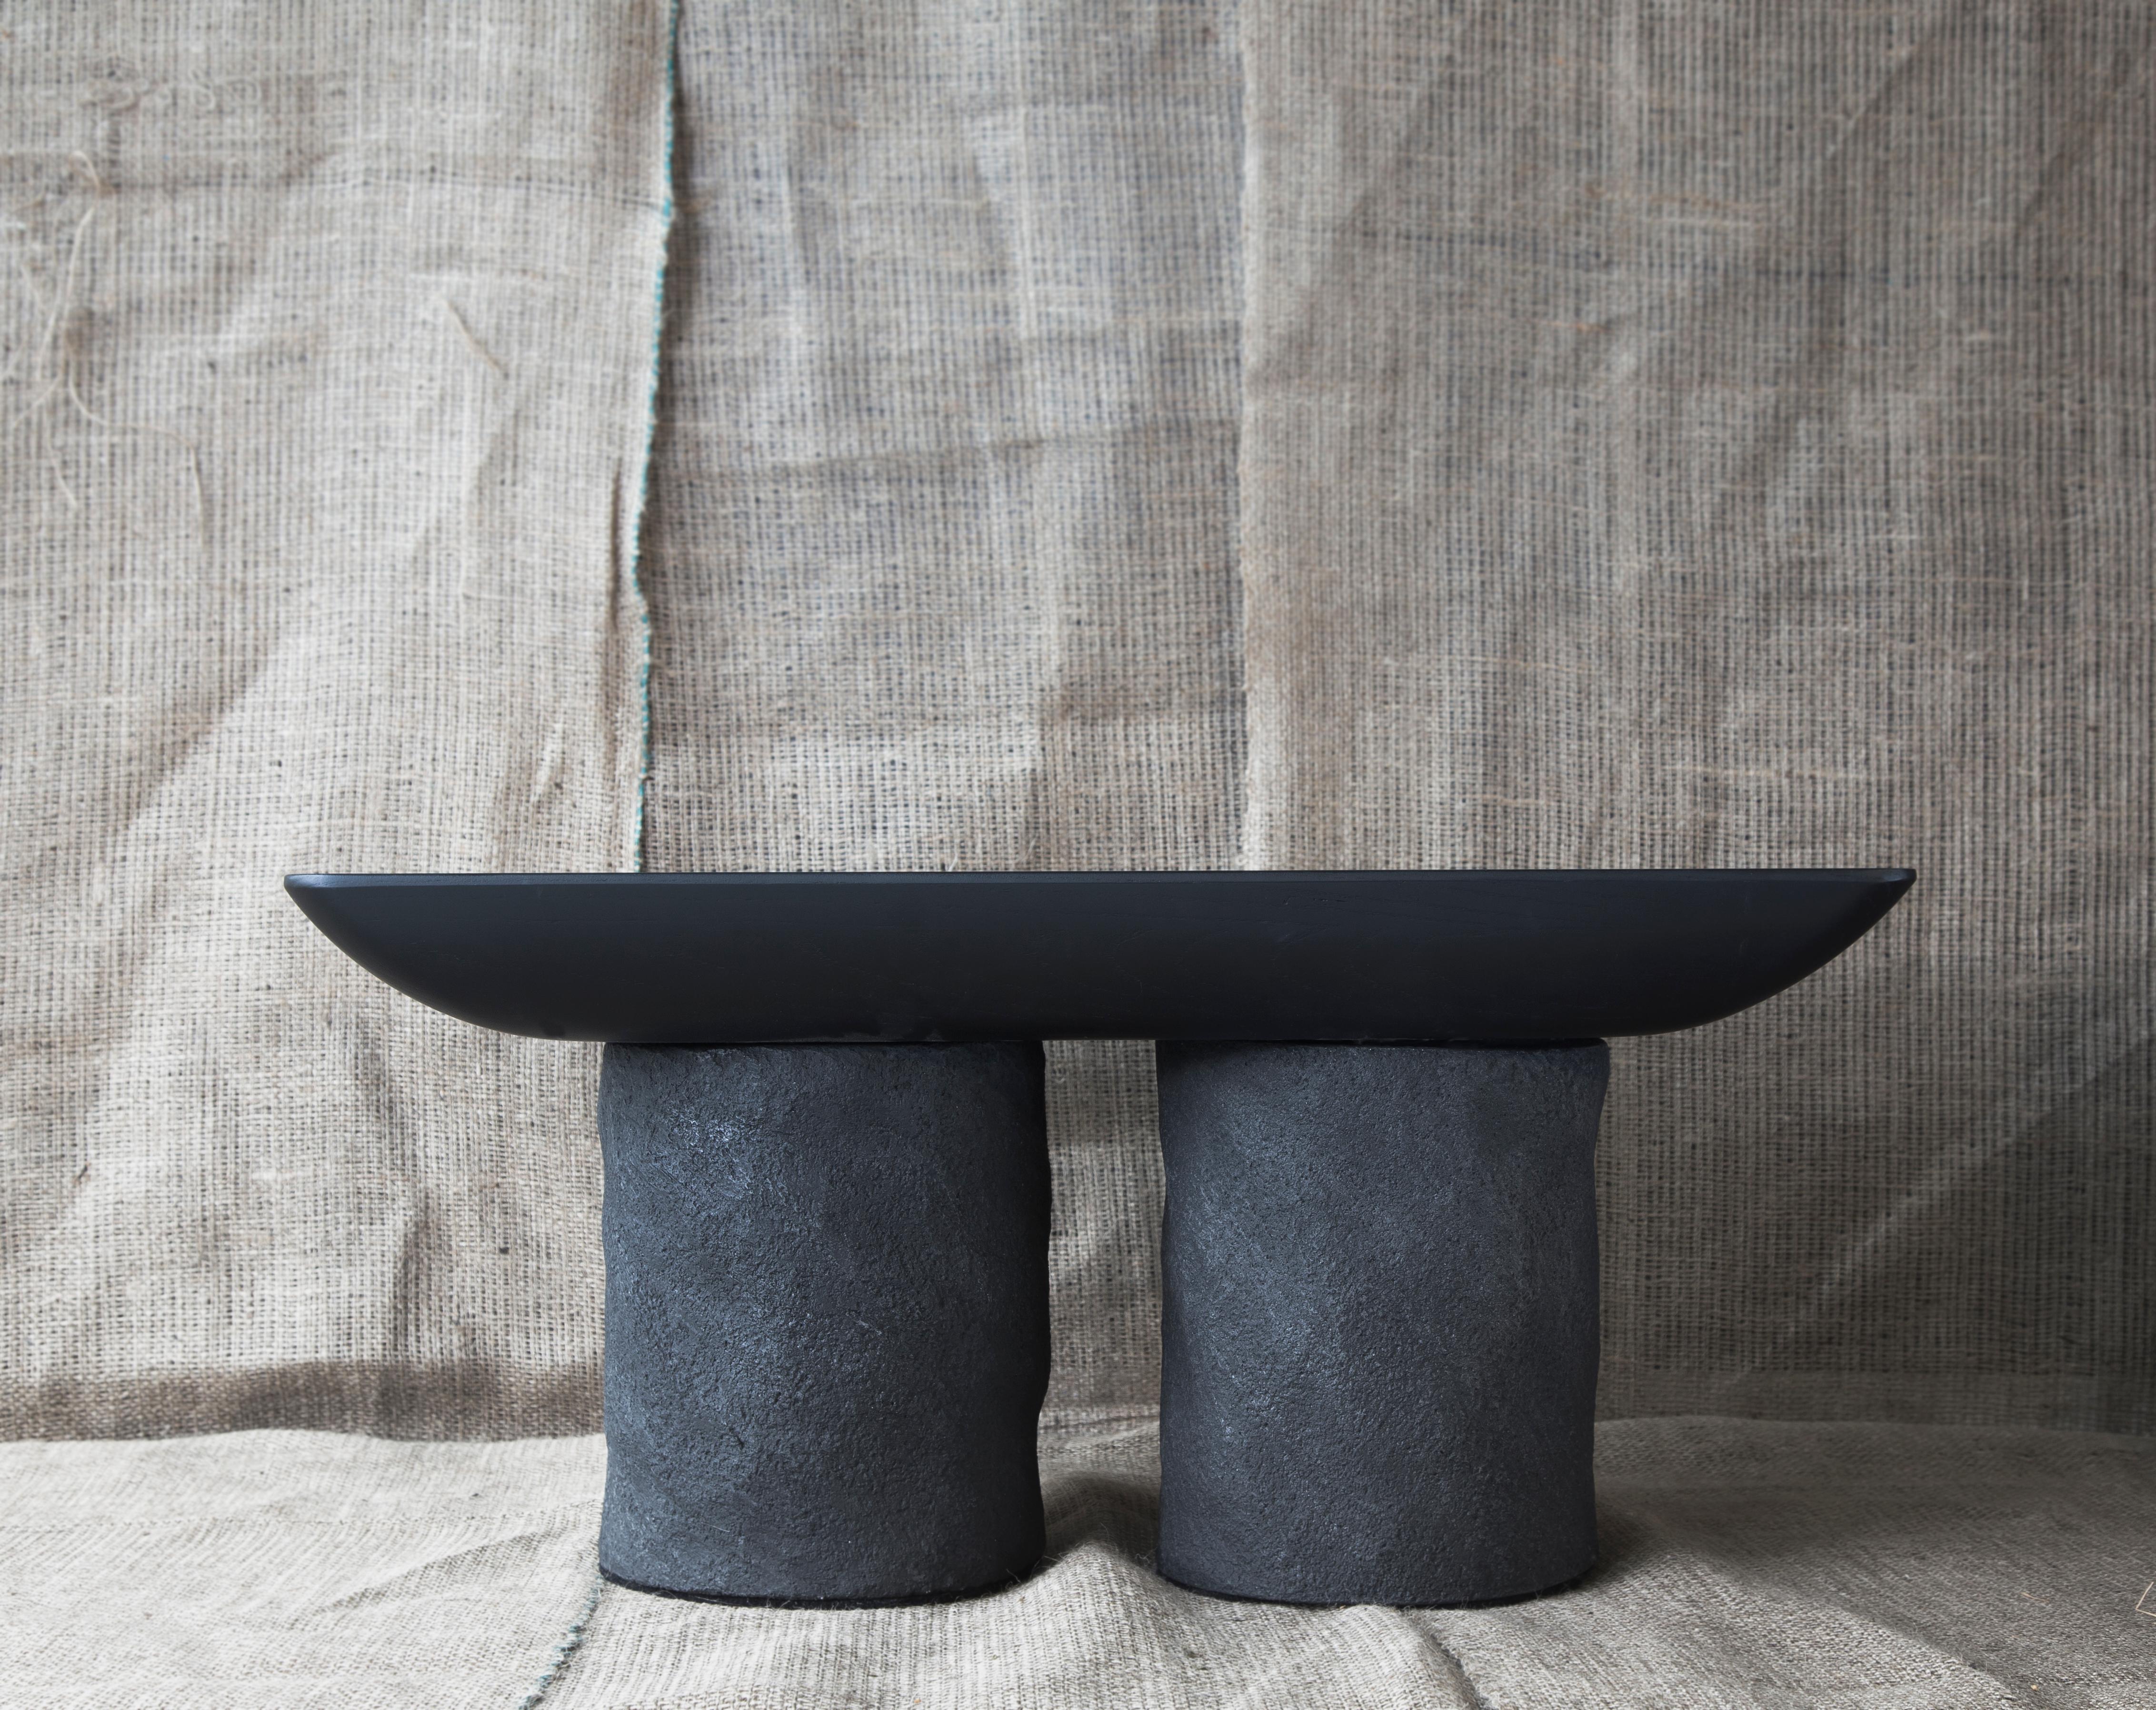 Big Korotun coffee table by Faina
Designed by Victoria Yakusha.
Dimensions: D 75 x W 42 x H 35 cm.
Material: Clay, Wood (Ash).

Made in the style of ethnic minimalism, the collection items introduce “naive design”- simple in form, yet with a deep